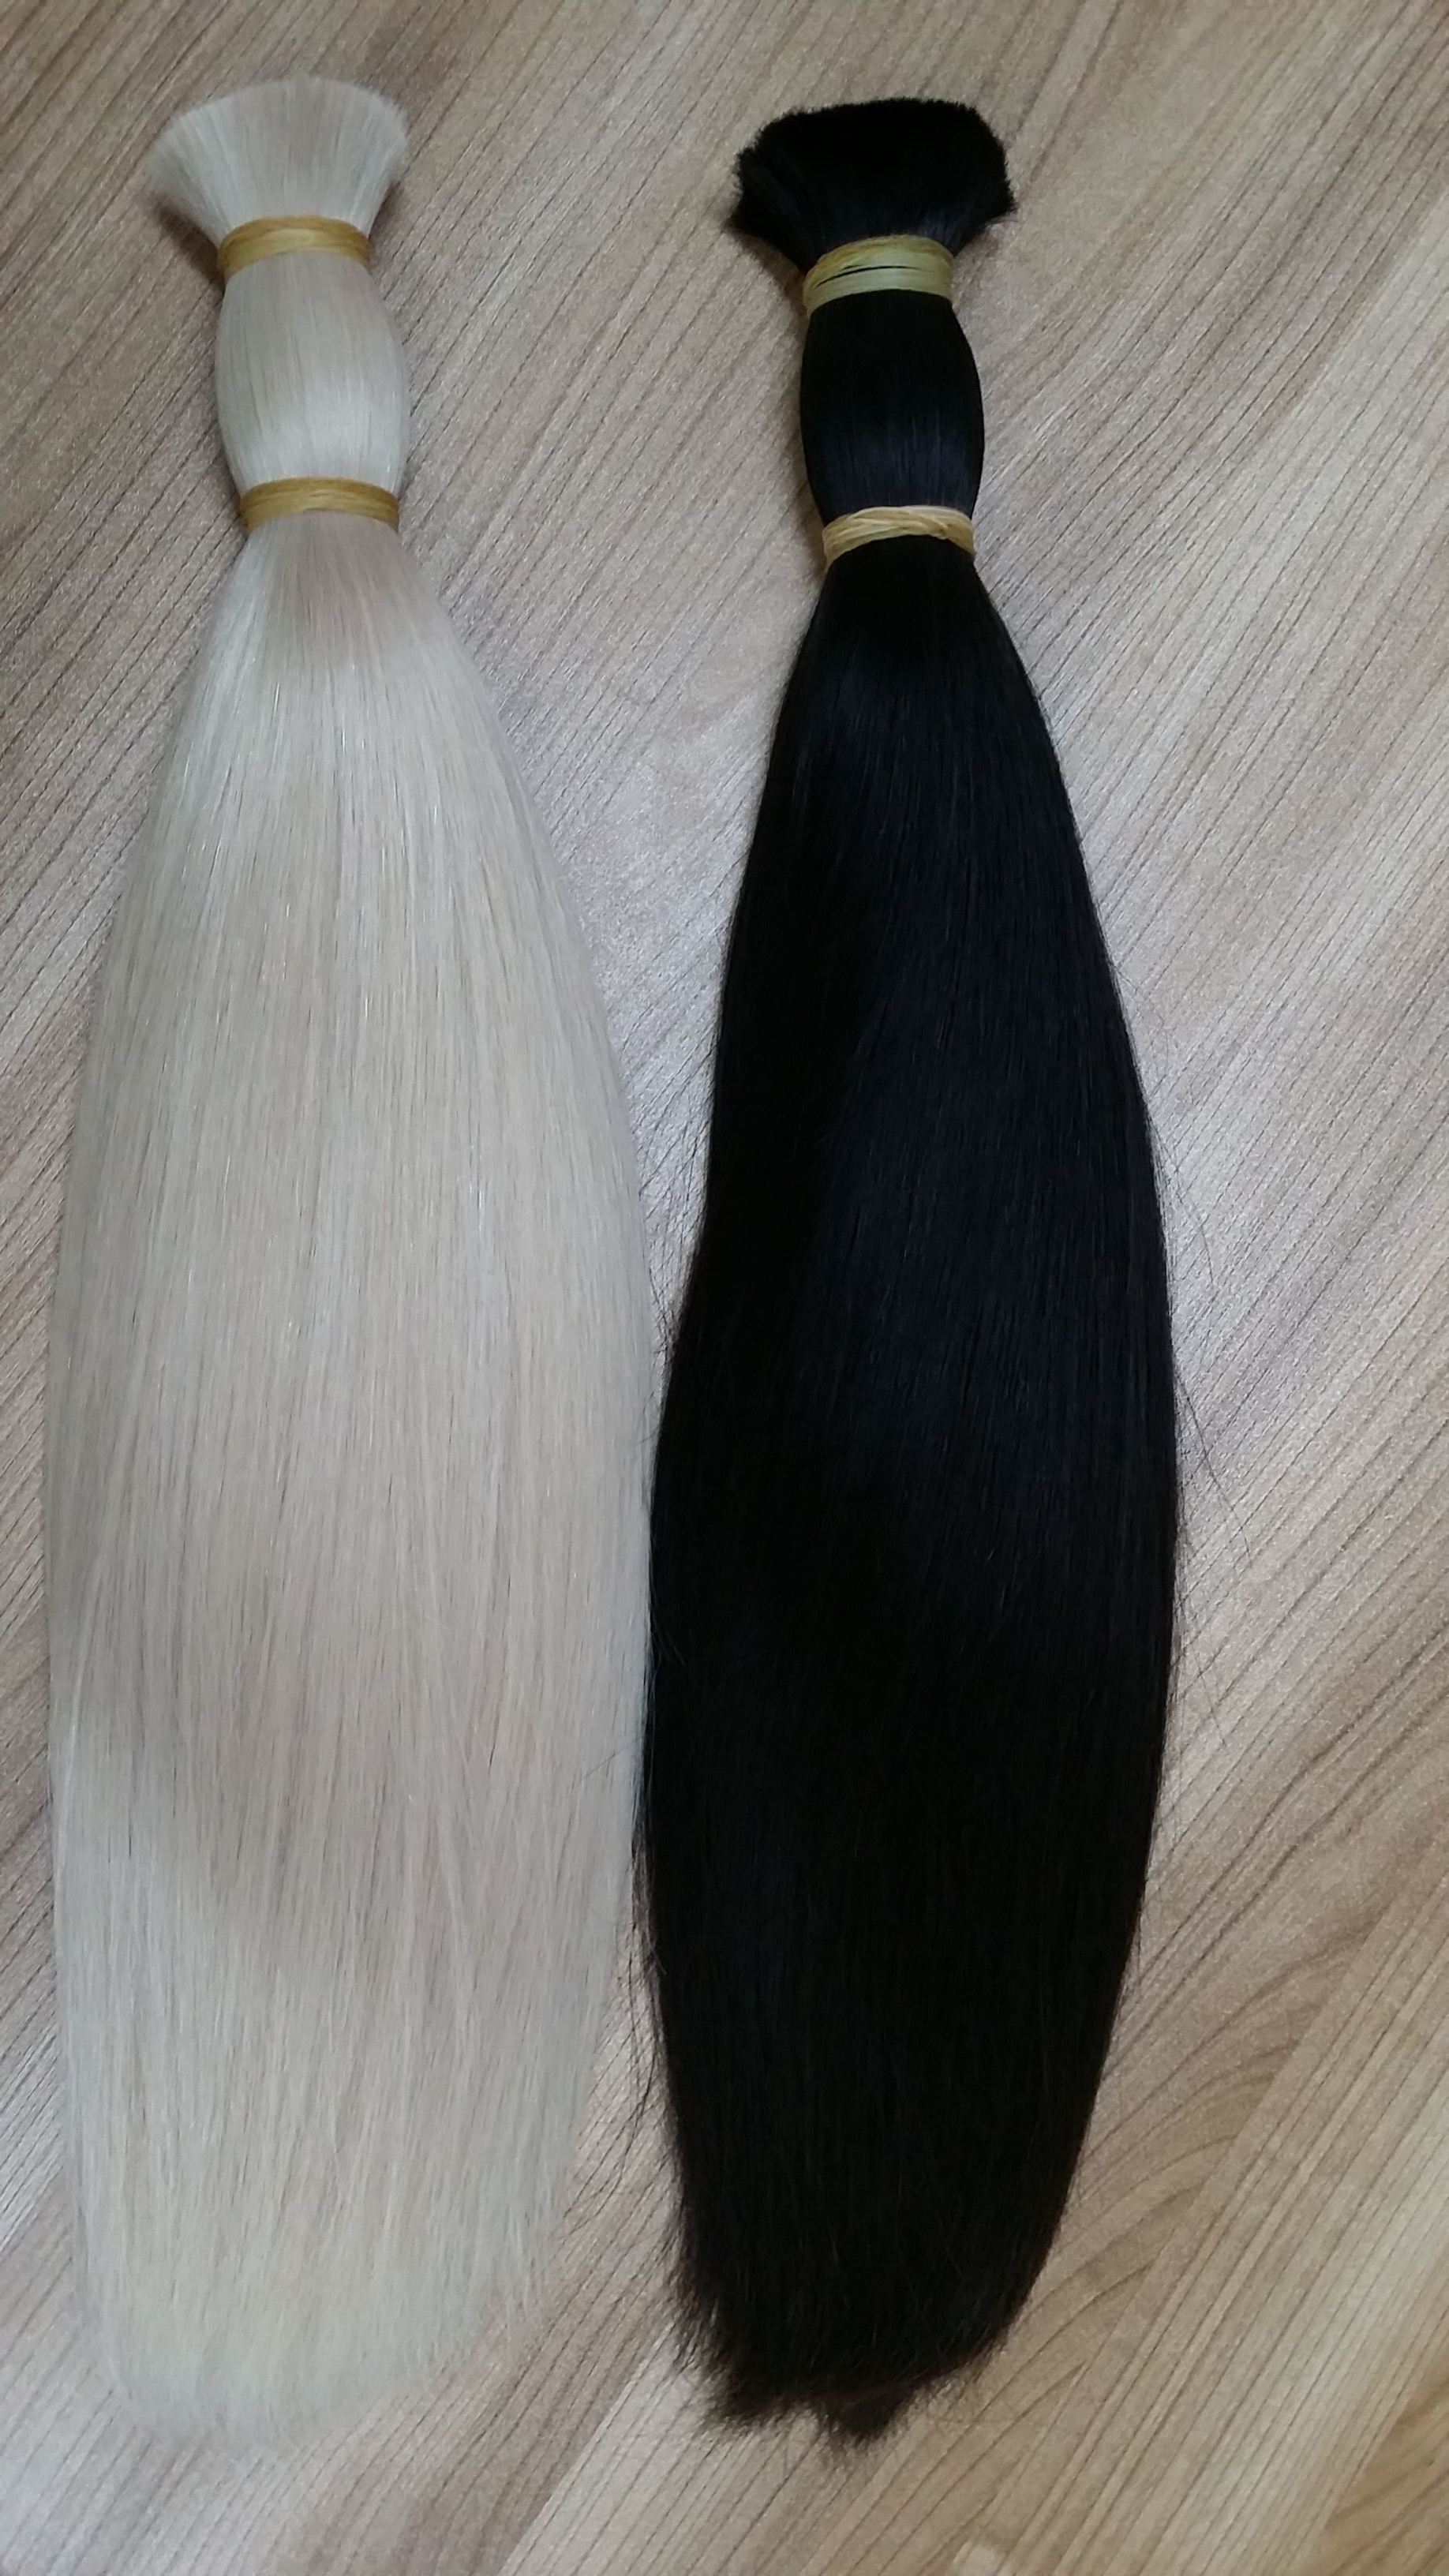 Want to Know More About Human Hair? human hair, hair extensions, lace front wigs